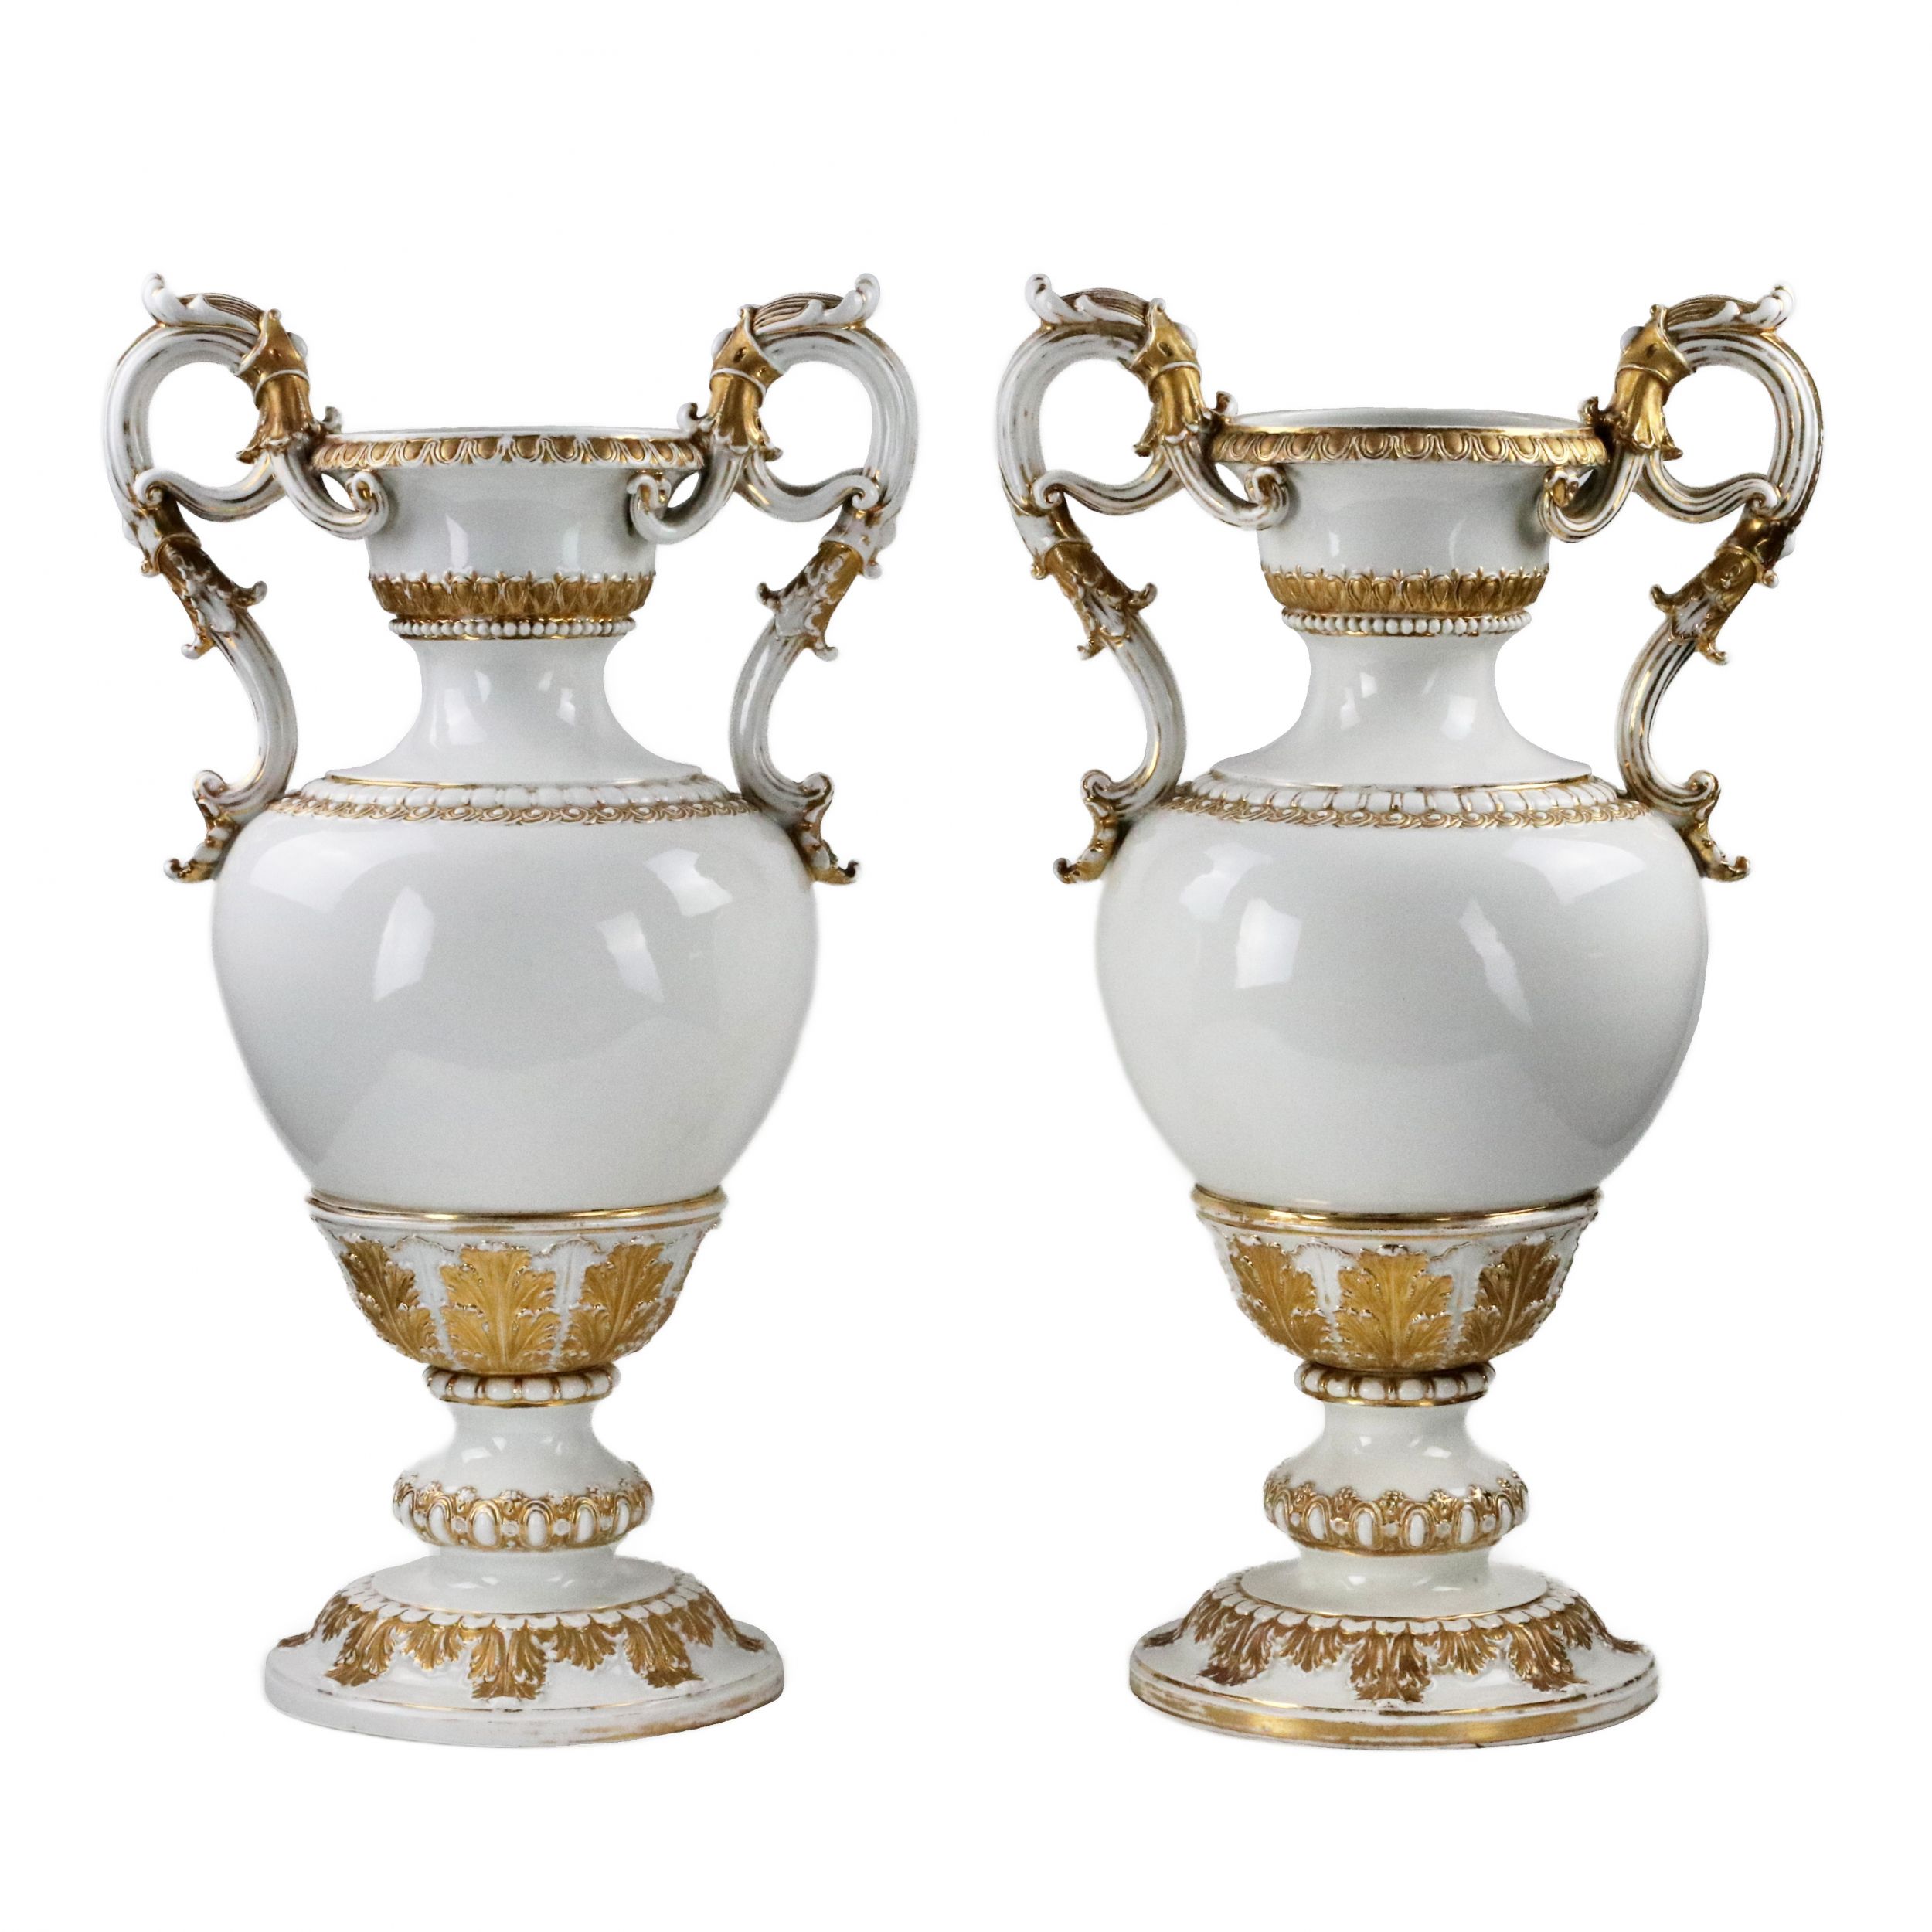 Pair-of-large-Meissen-porcelain-vases-with-decoration-in-gold-on-white-Napoleon-III-style-